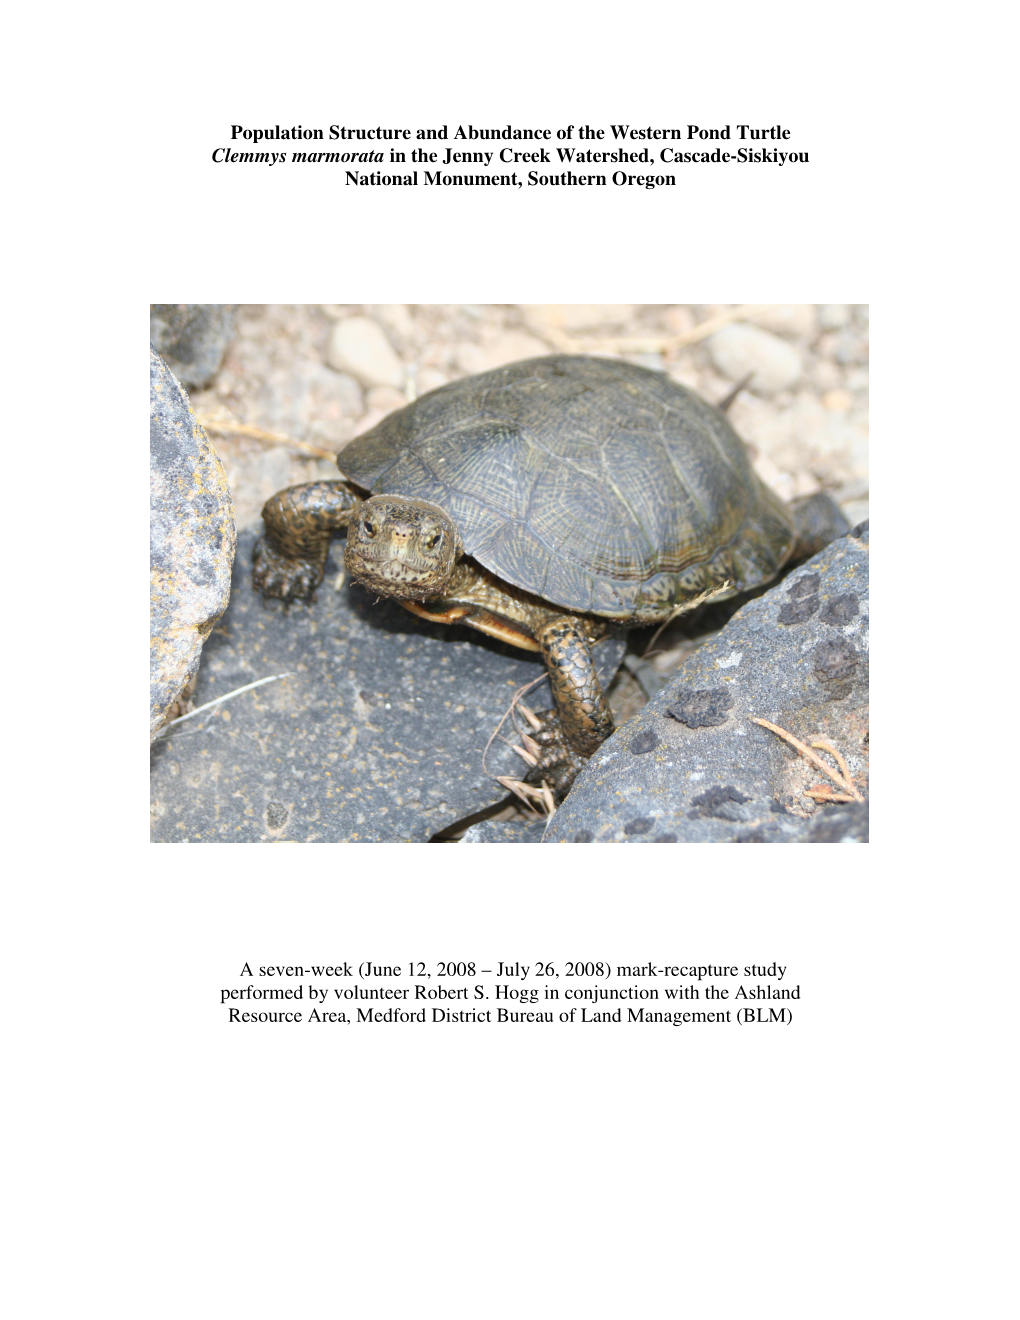 Population Structure and Abundance of the Western Pond Turtle Clemmys Marmorata in the Jenny Creek Watershed, Cascade-Siskiyou National Monument, Southern Oregon